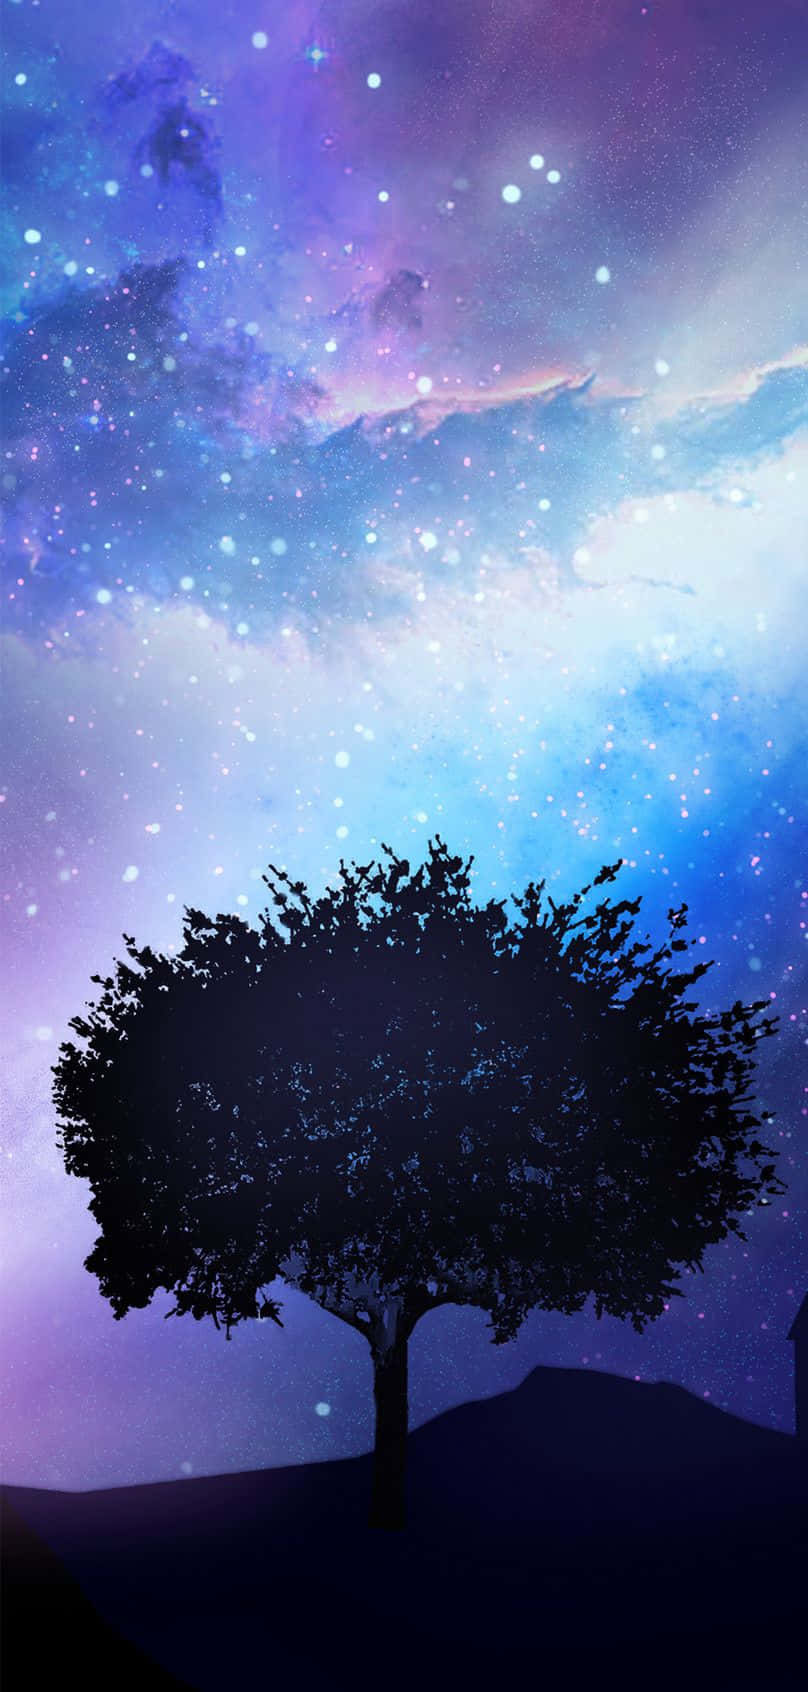 A Tree In The Sky Wallpaper